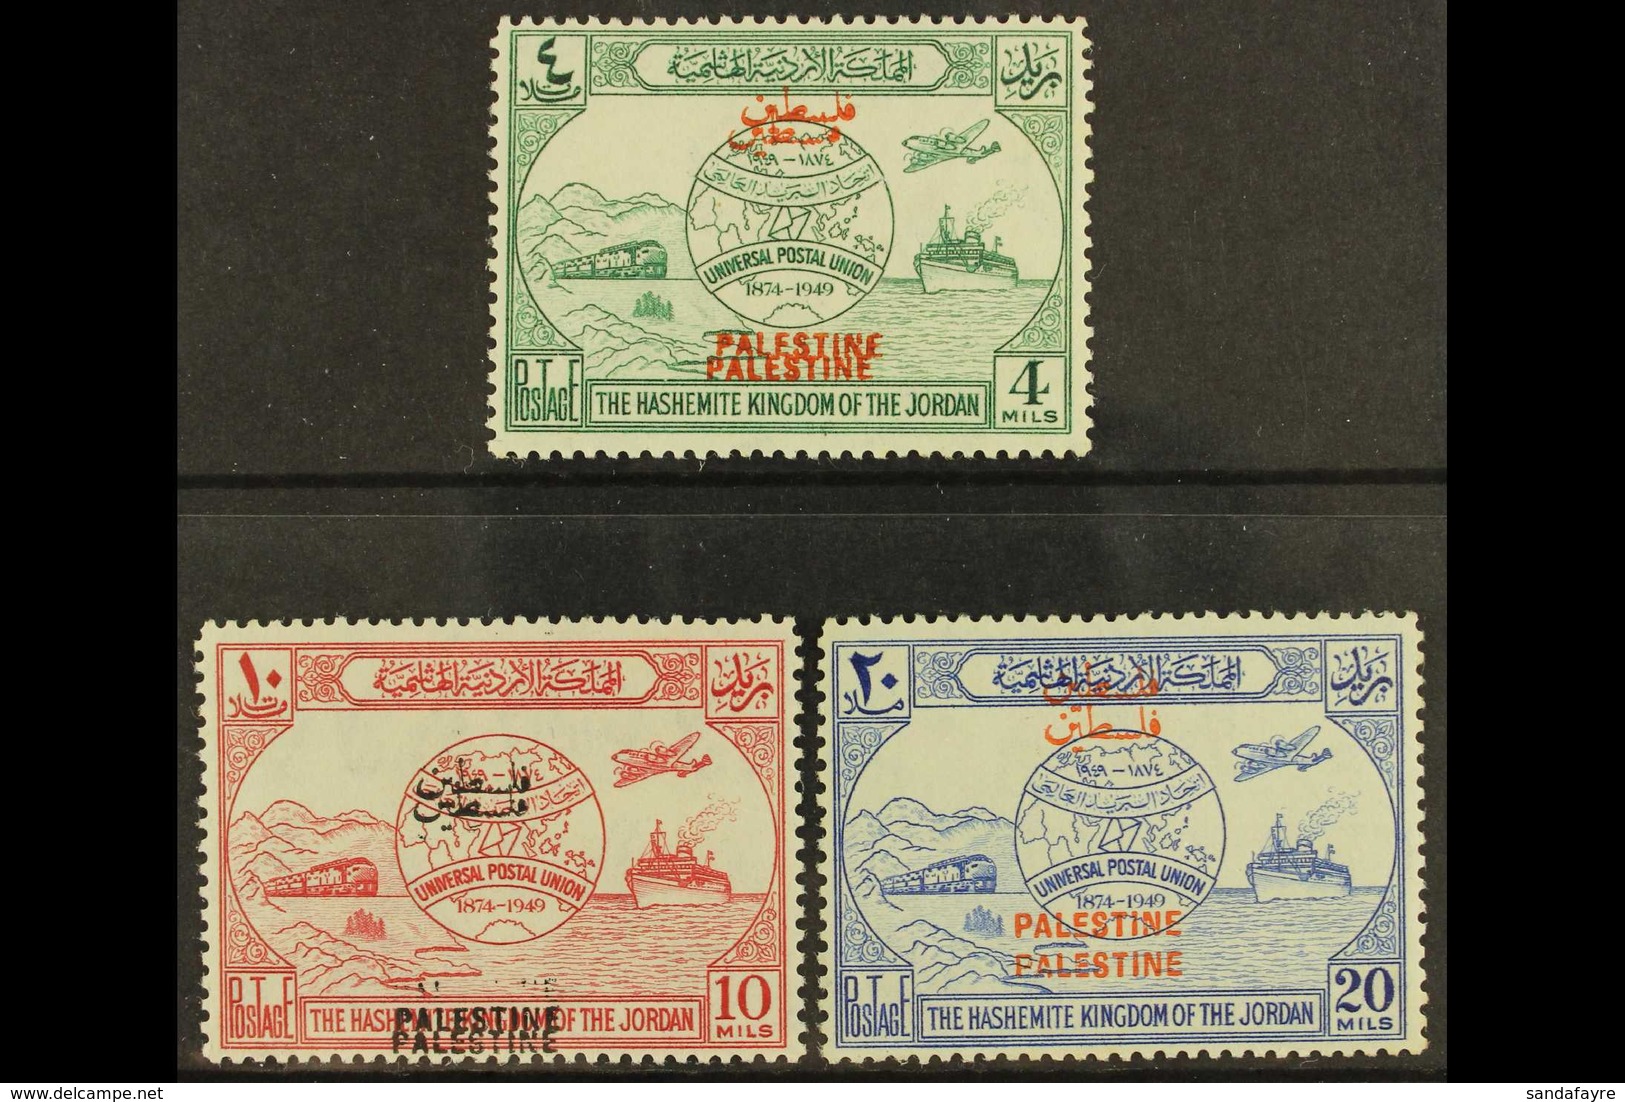 JORDAN OCCUPATION 1949 4m Green, 10m Carmine And 20m Blue UPU All Three Stamps With DOUBLE OVERPRINTS, SG P31c, P32b & P - Palestine